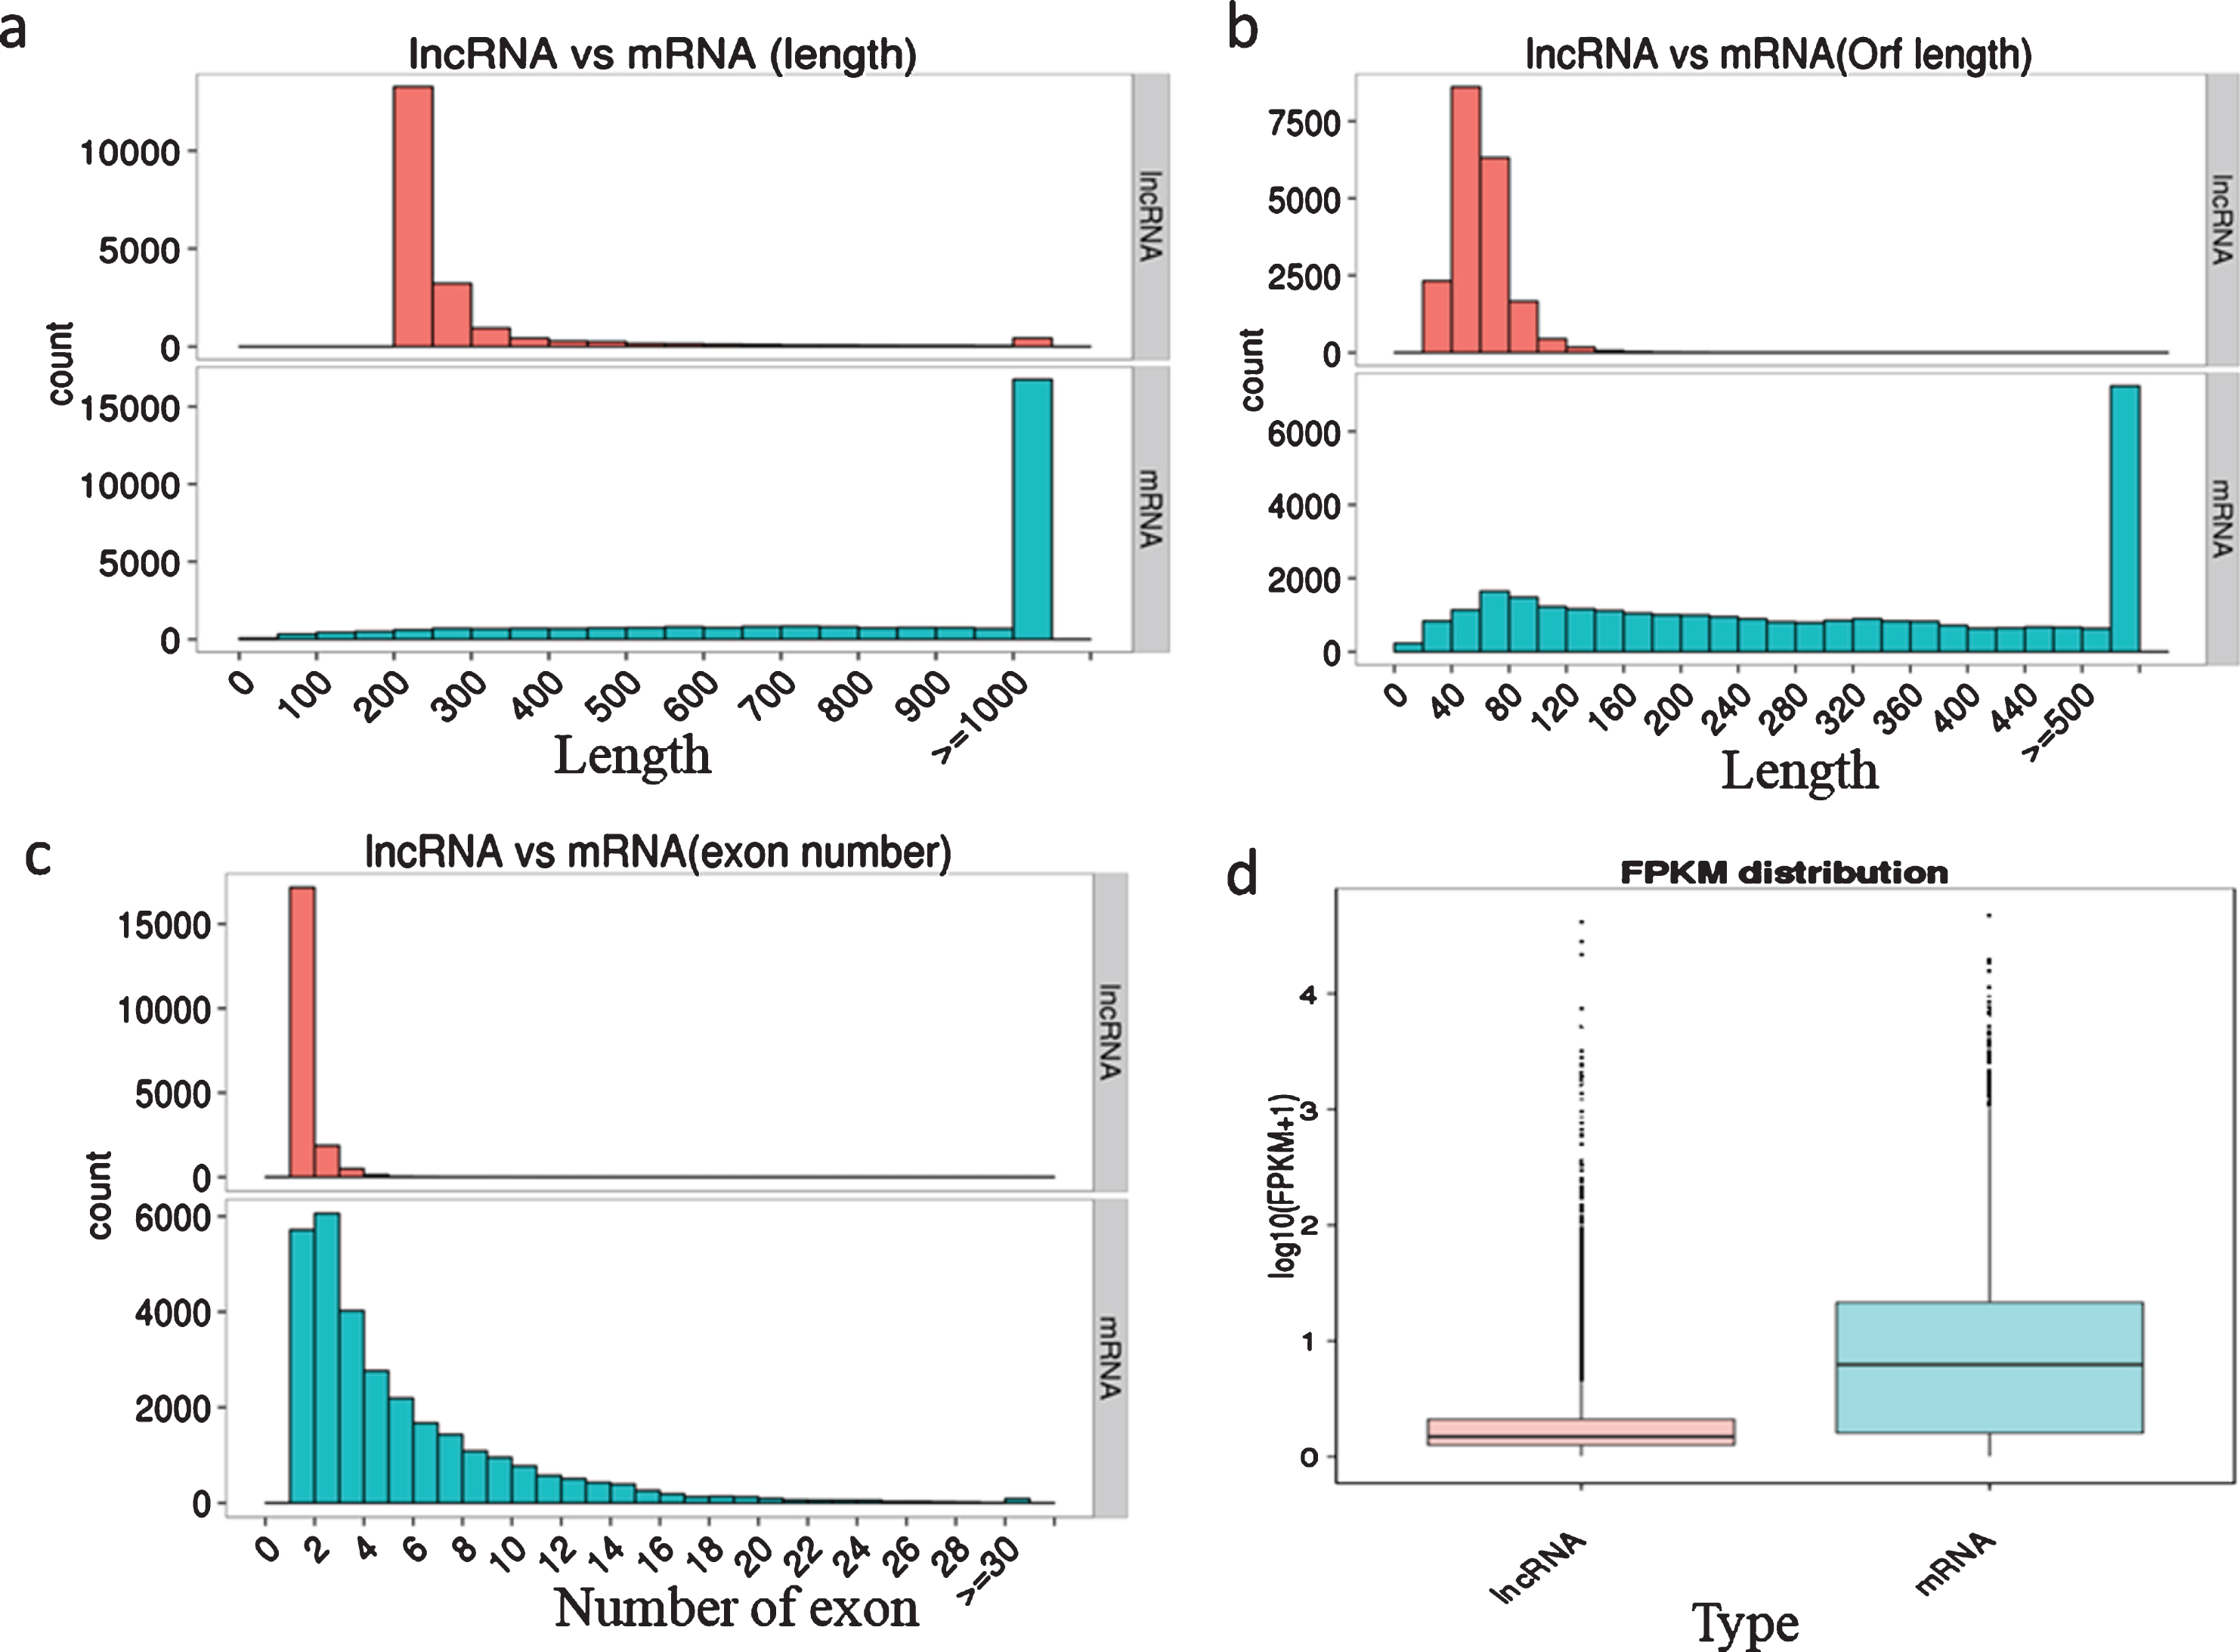 Characterization of genomic features of the lncRNAs and mRNAs. a, Length distribution of the transcripts; b, Open reading frame length of the transcripts; c, Exon number of the transcripts; d, FPKM distribution of the transcripts.